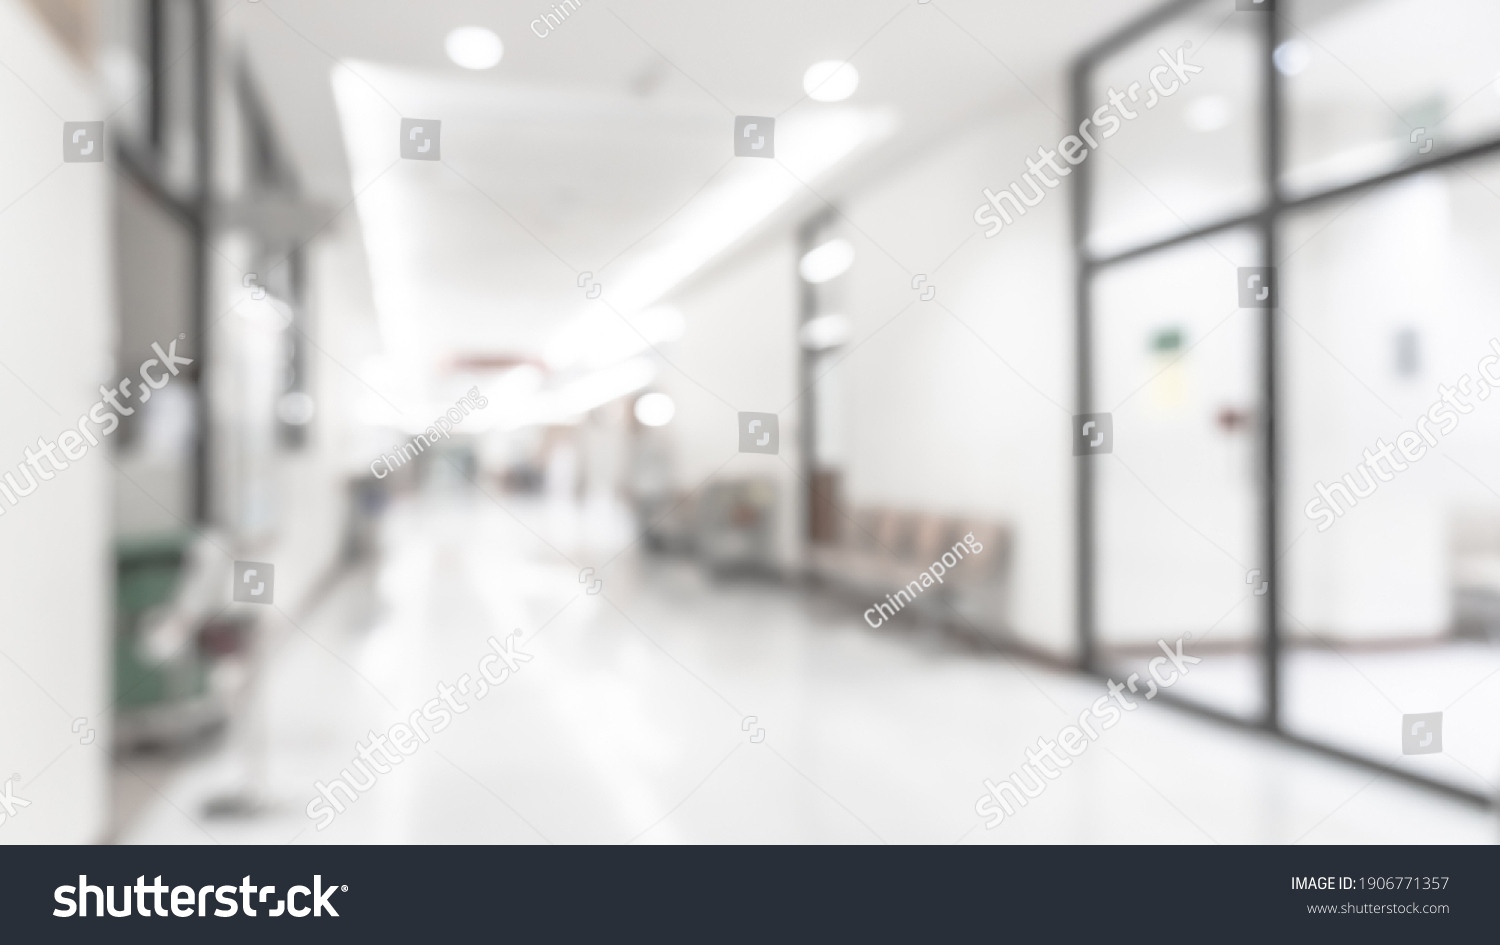 Medical clinic blur background hospital service center in patient’s ward blurry perspective view of interior white room, lab corridor hallway, lobby or walkway for nursing care healthcare service #1906771357